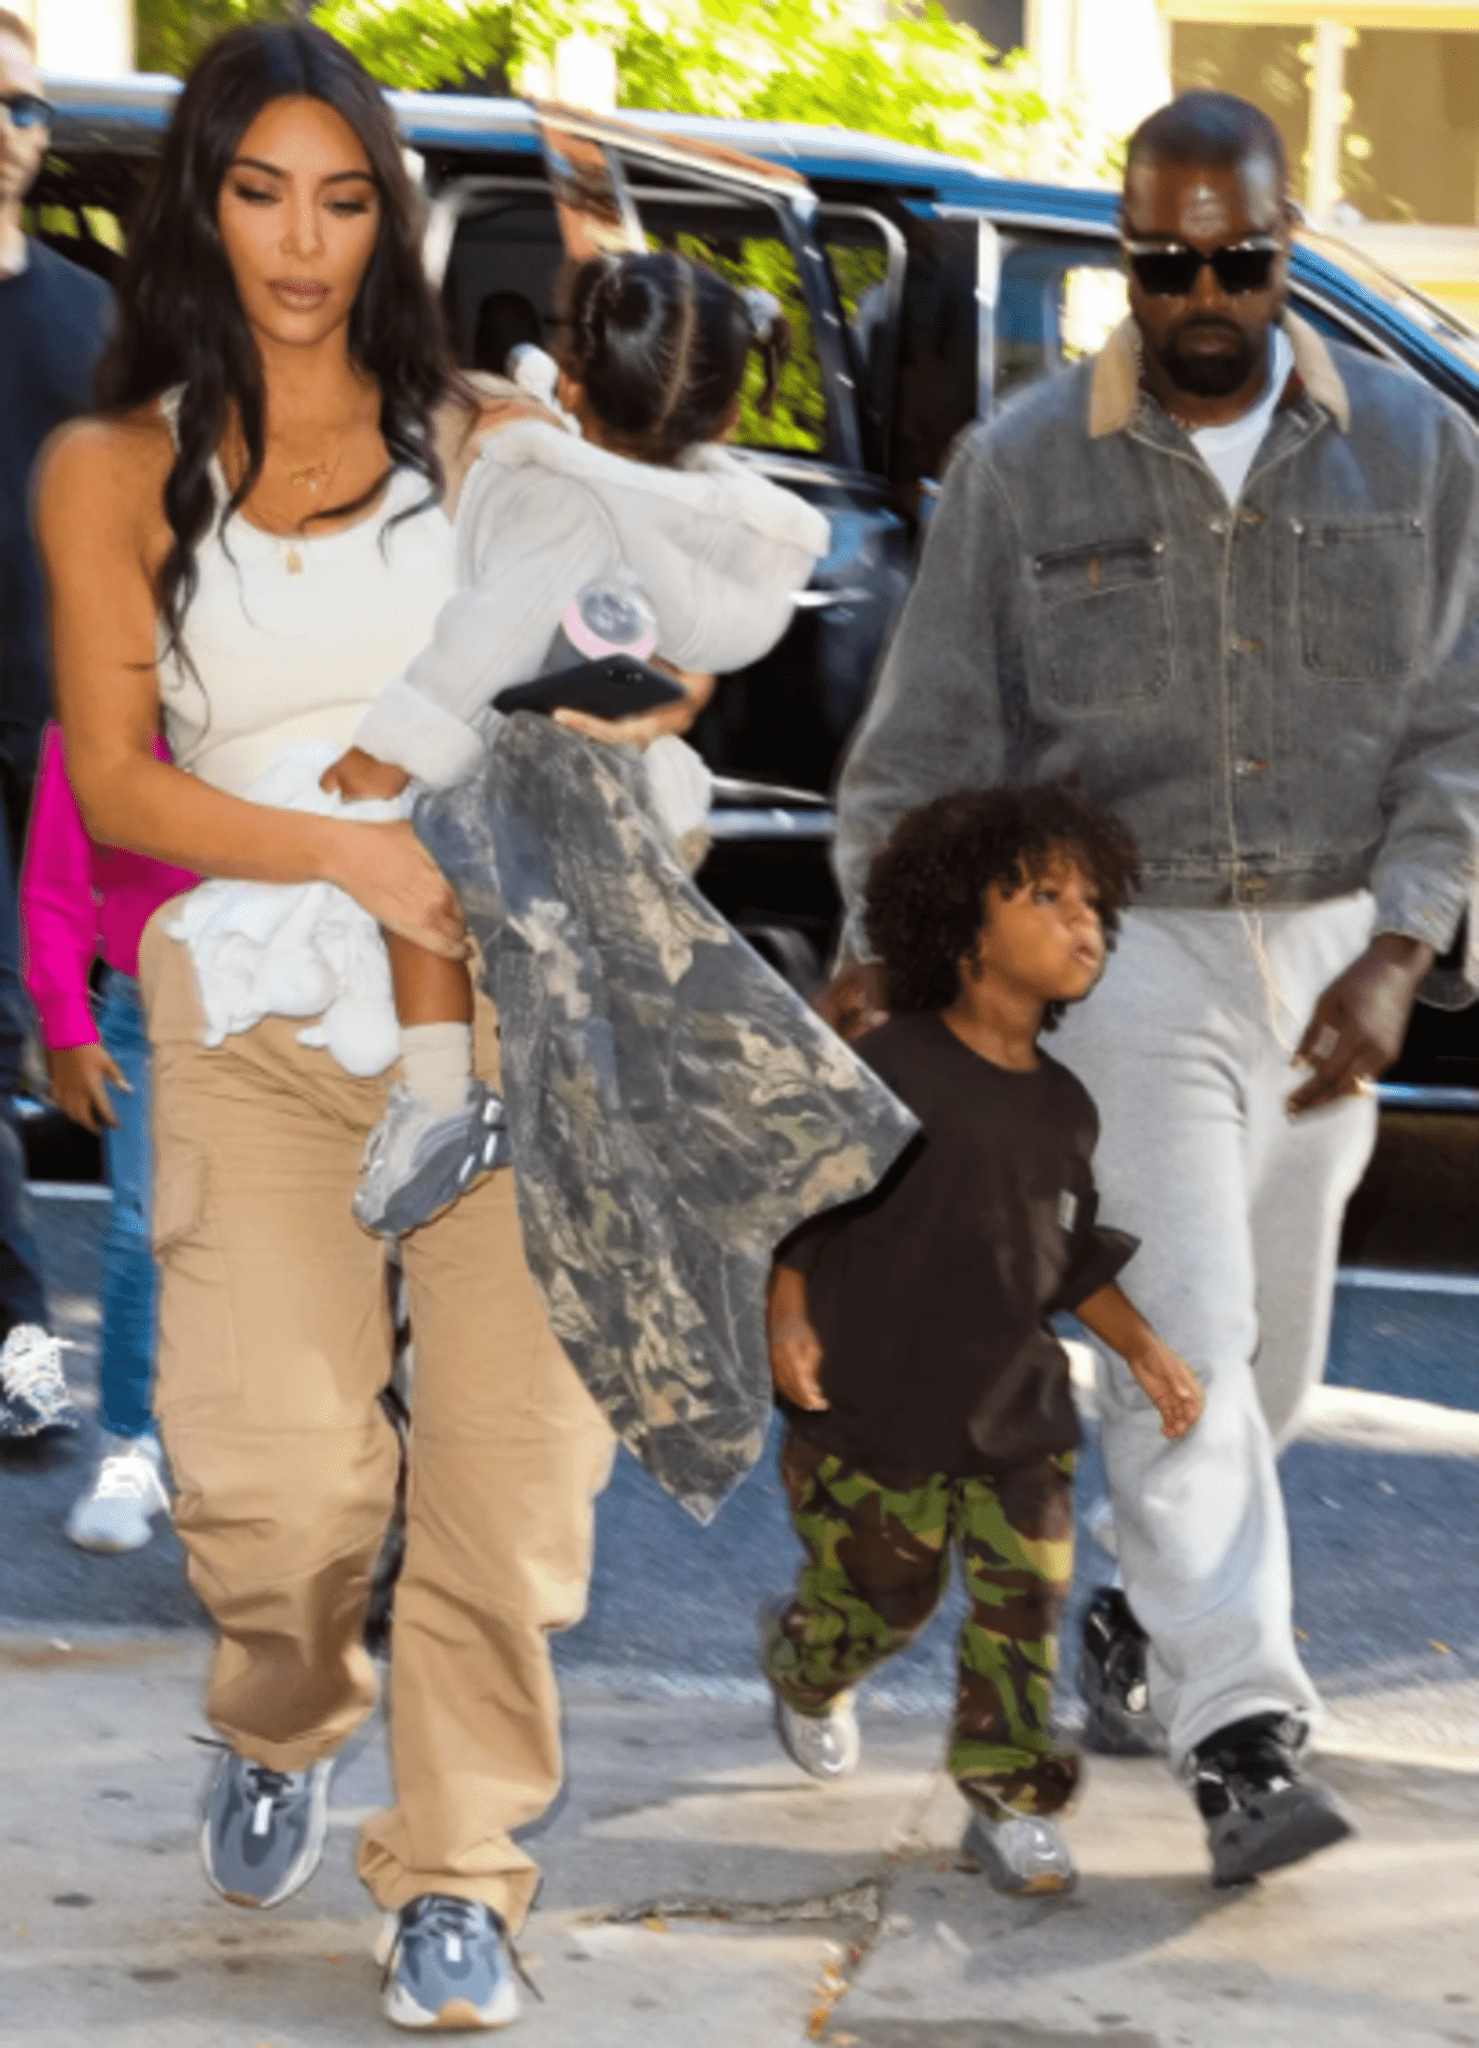 Kanye West discussed the schooling of his children in an interview with Tucker Carlson.